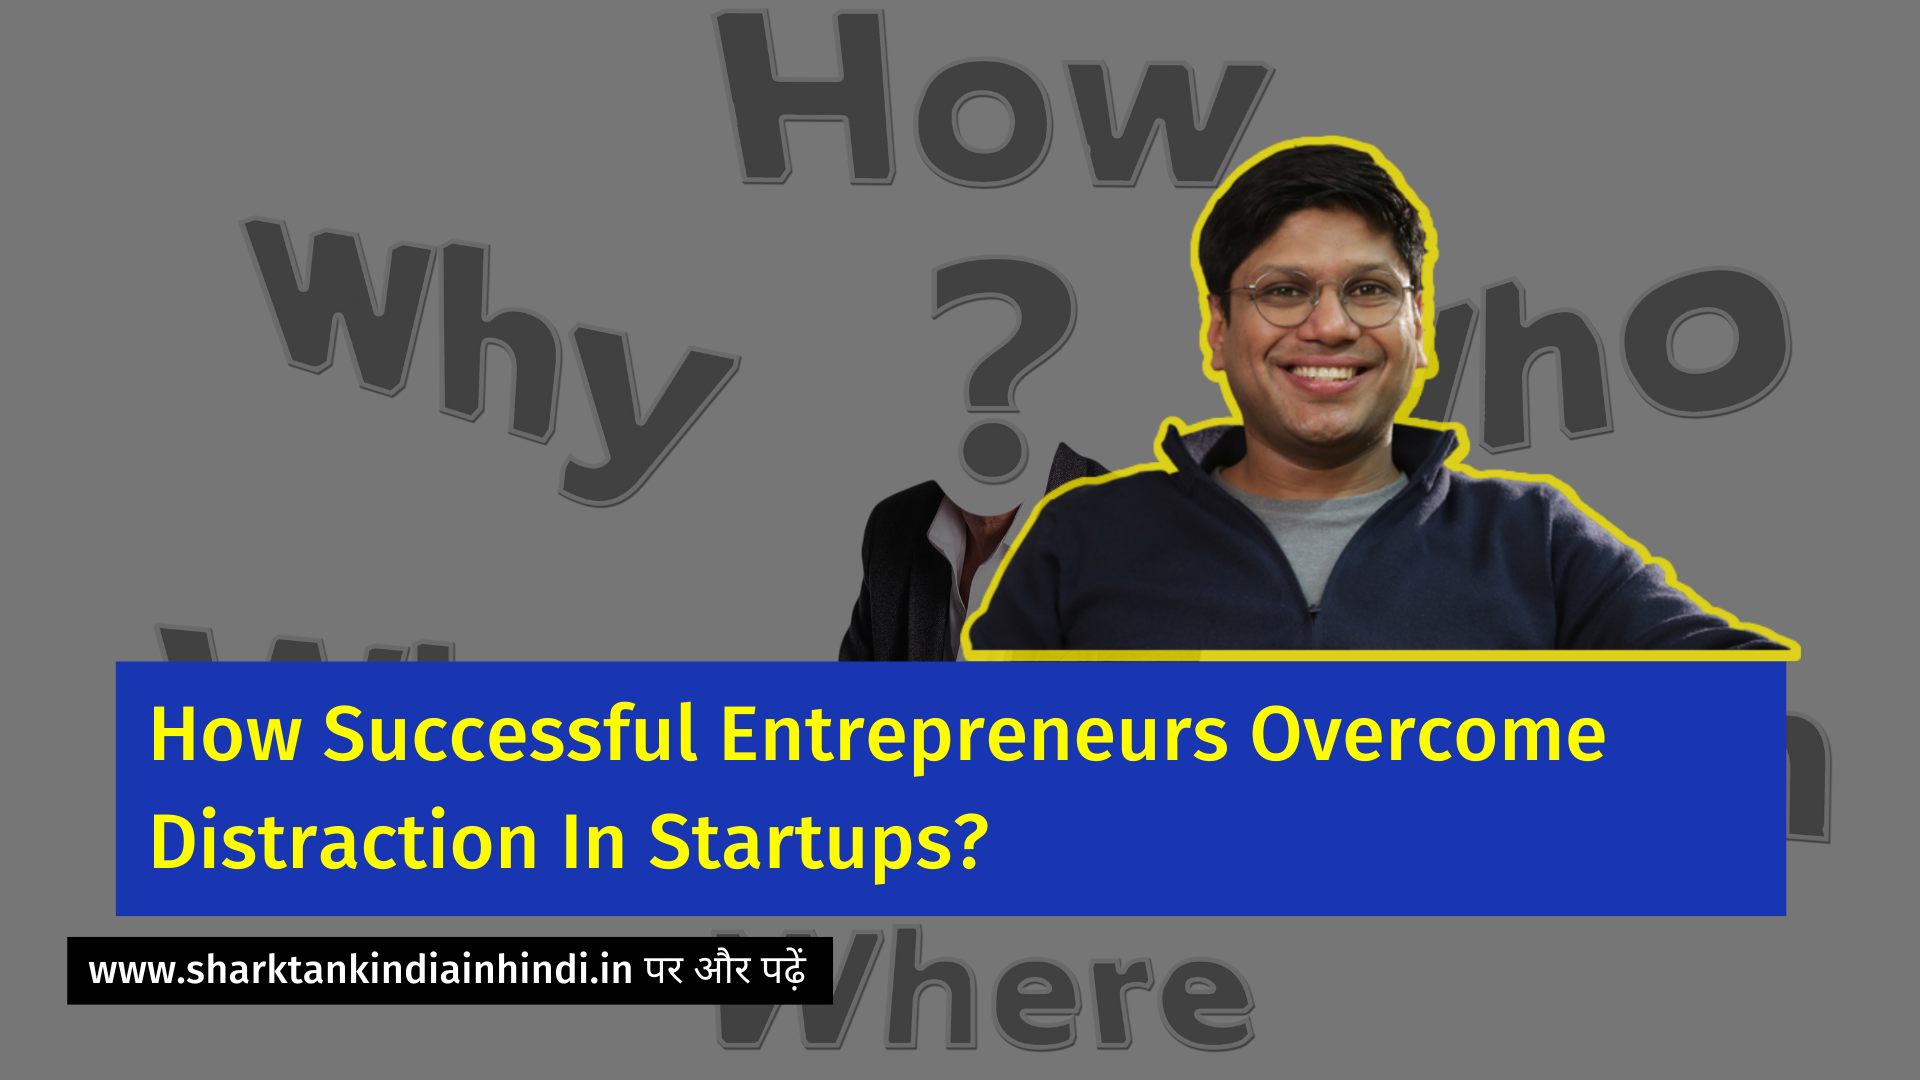 How Successful Entrepreneurs Overcome Distraction In Startups?